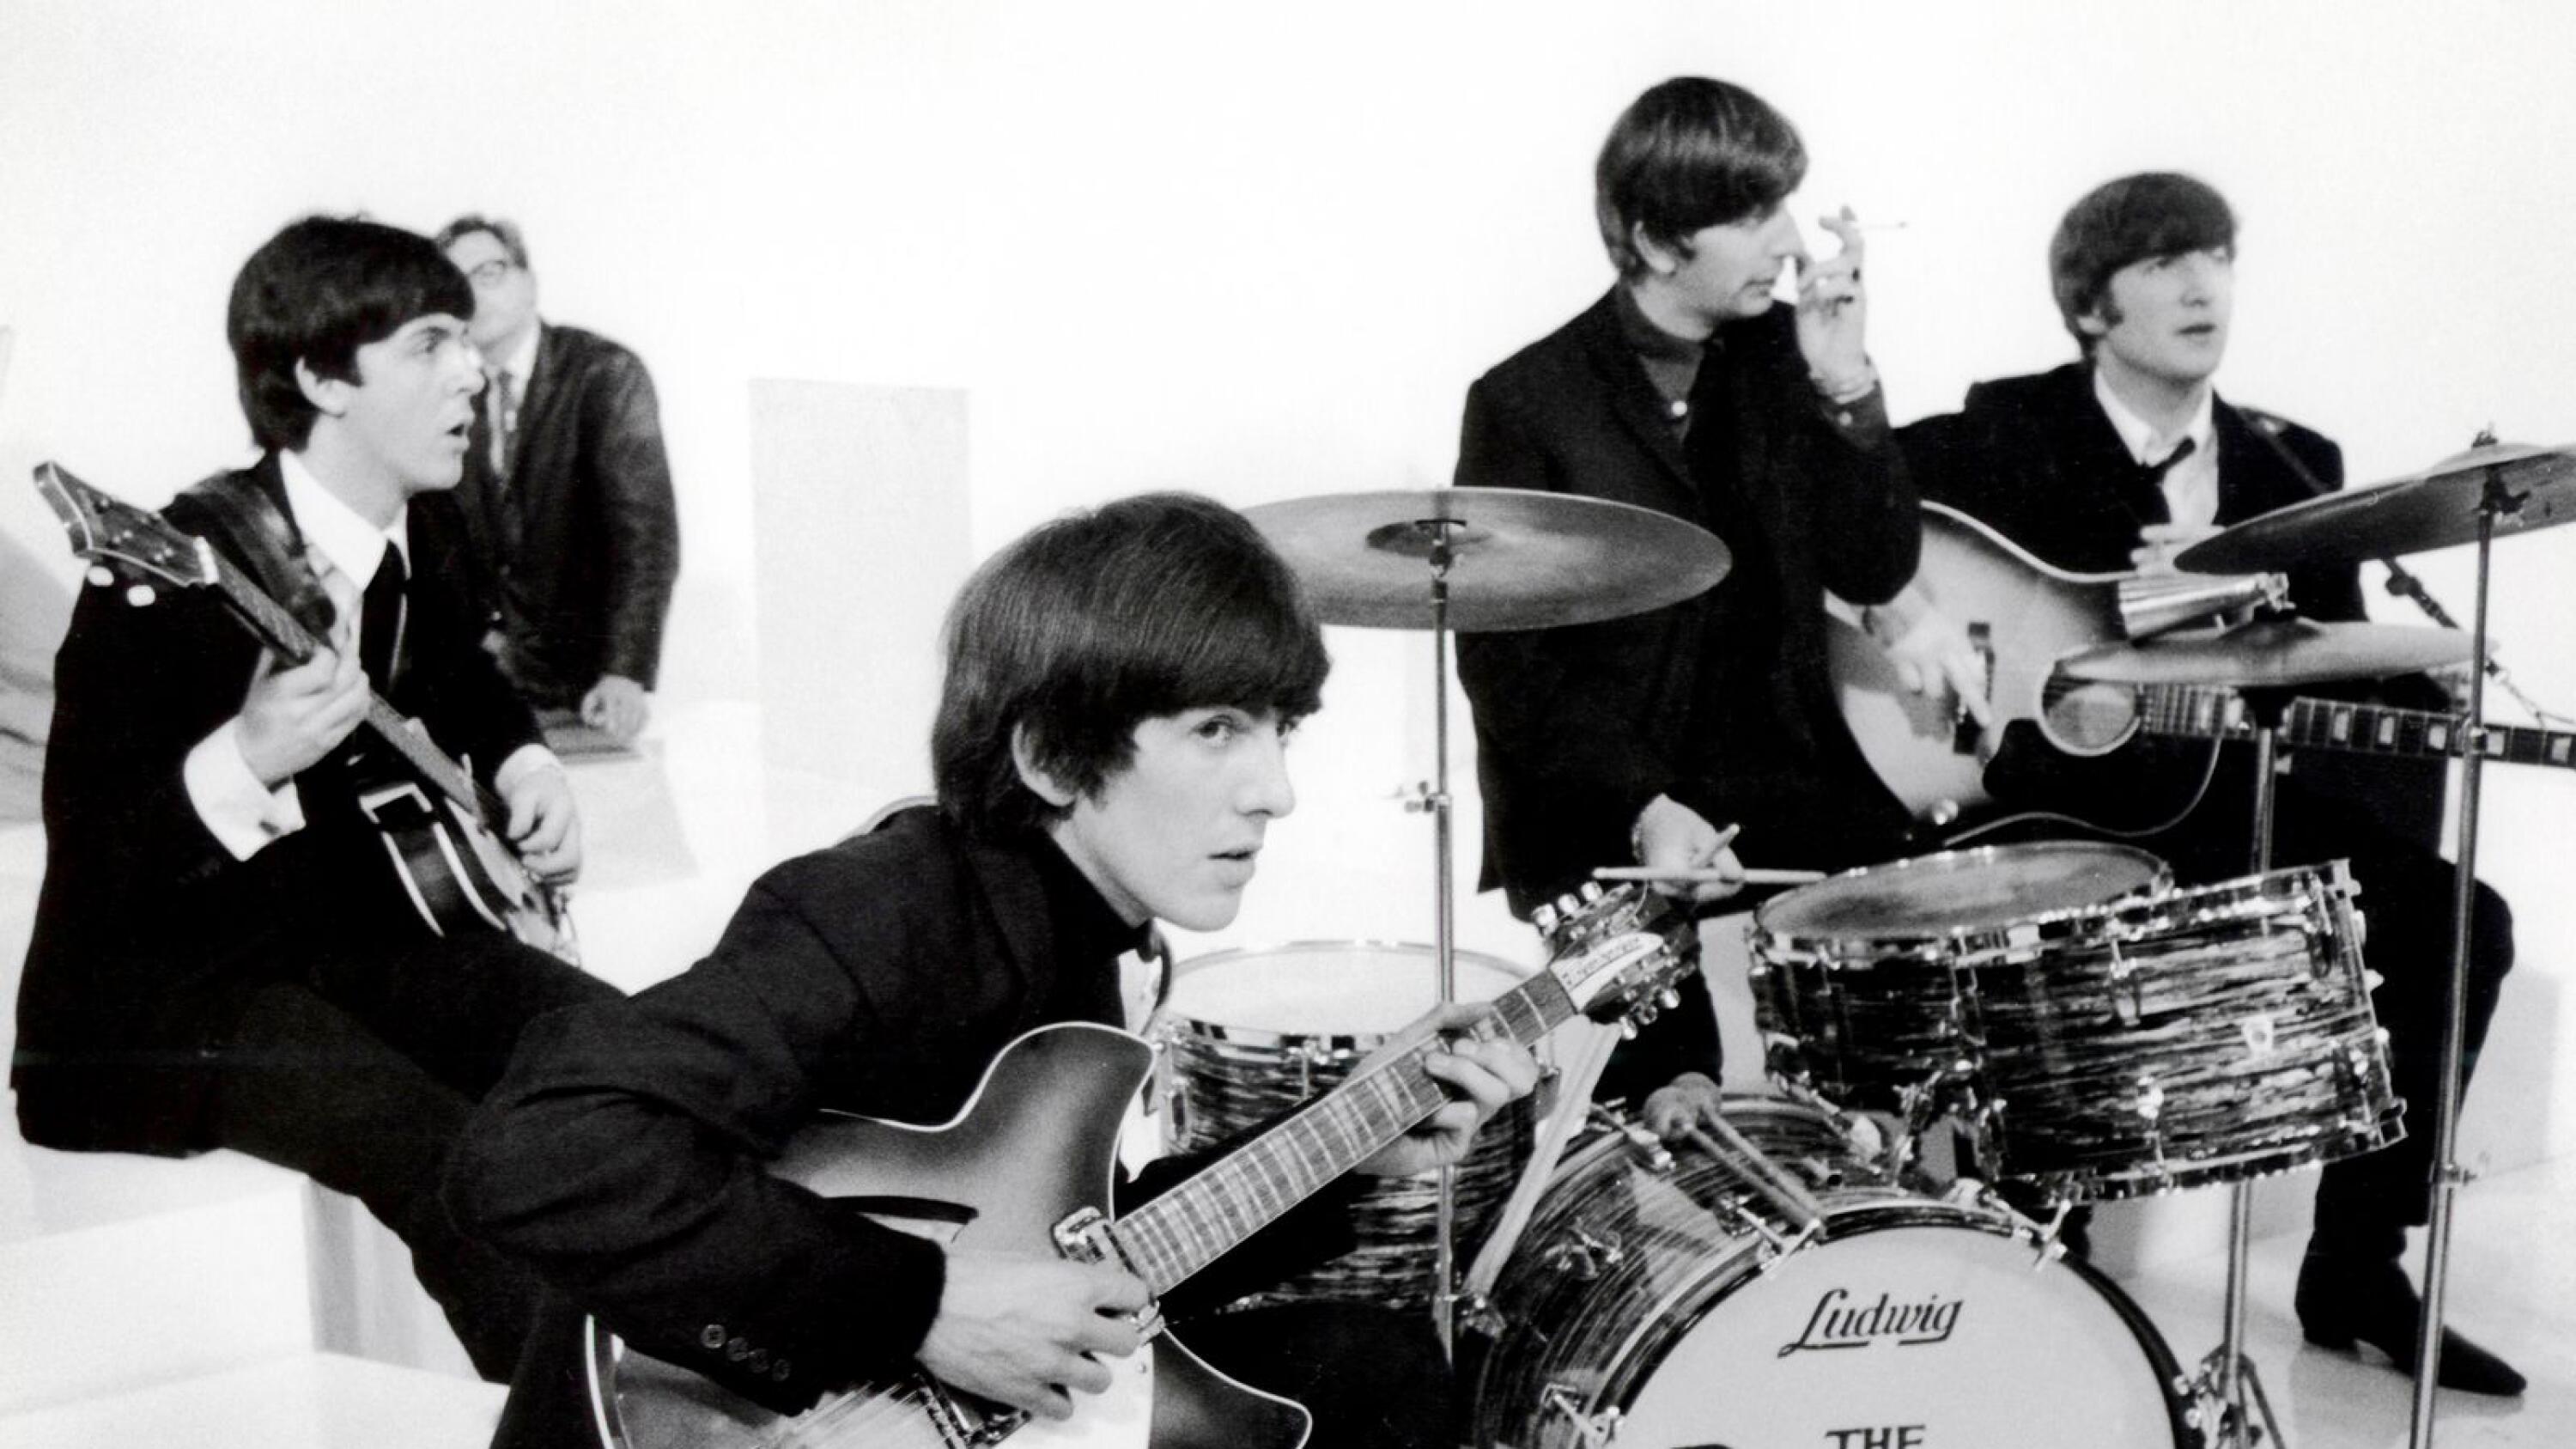 Book review: The Reluctant Beatle is an insightful but cold biography of George  Harrison